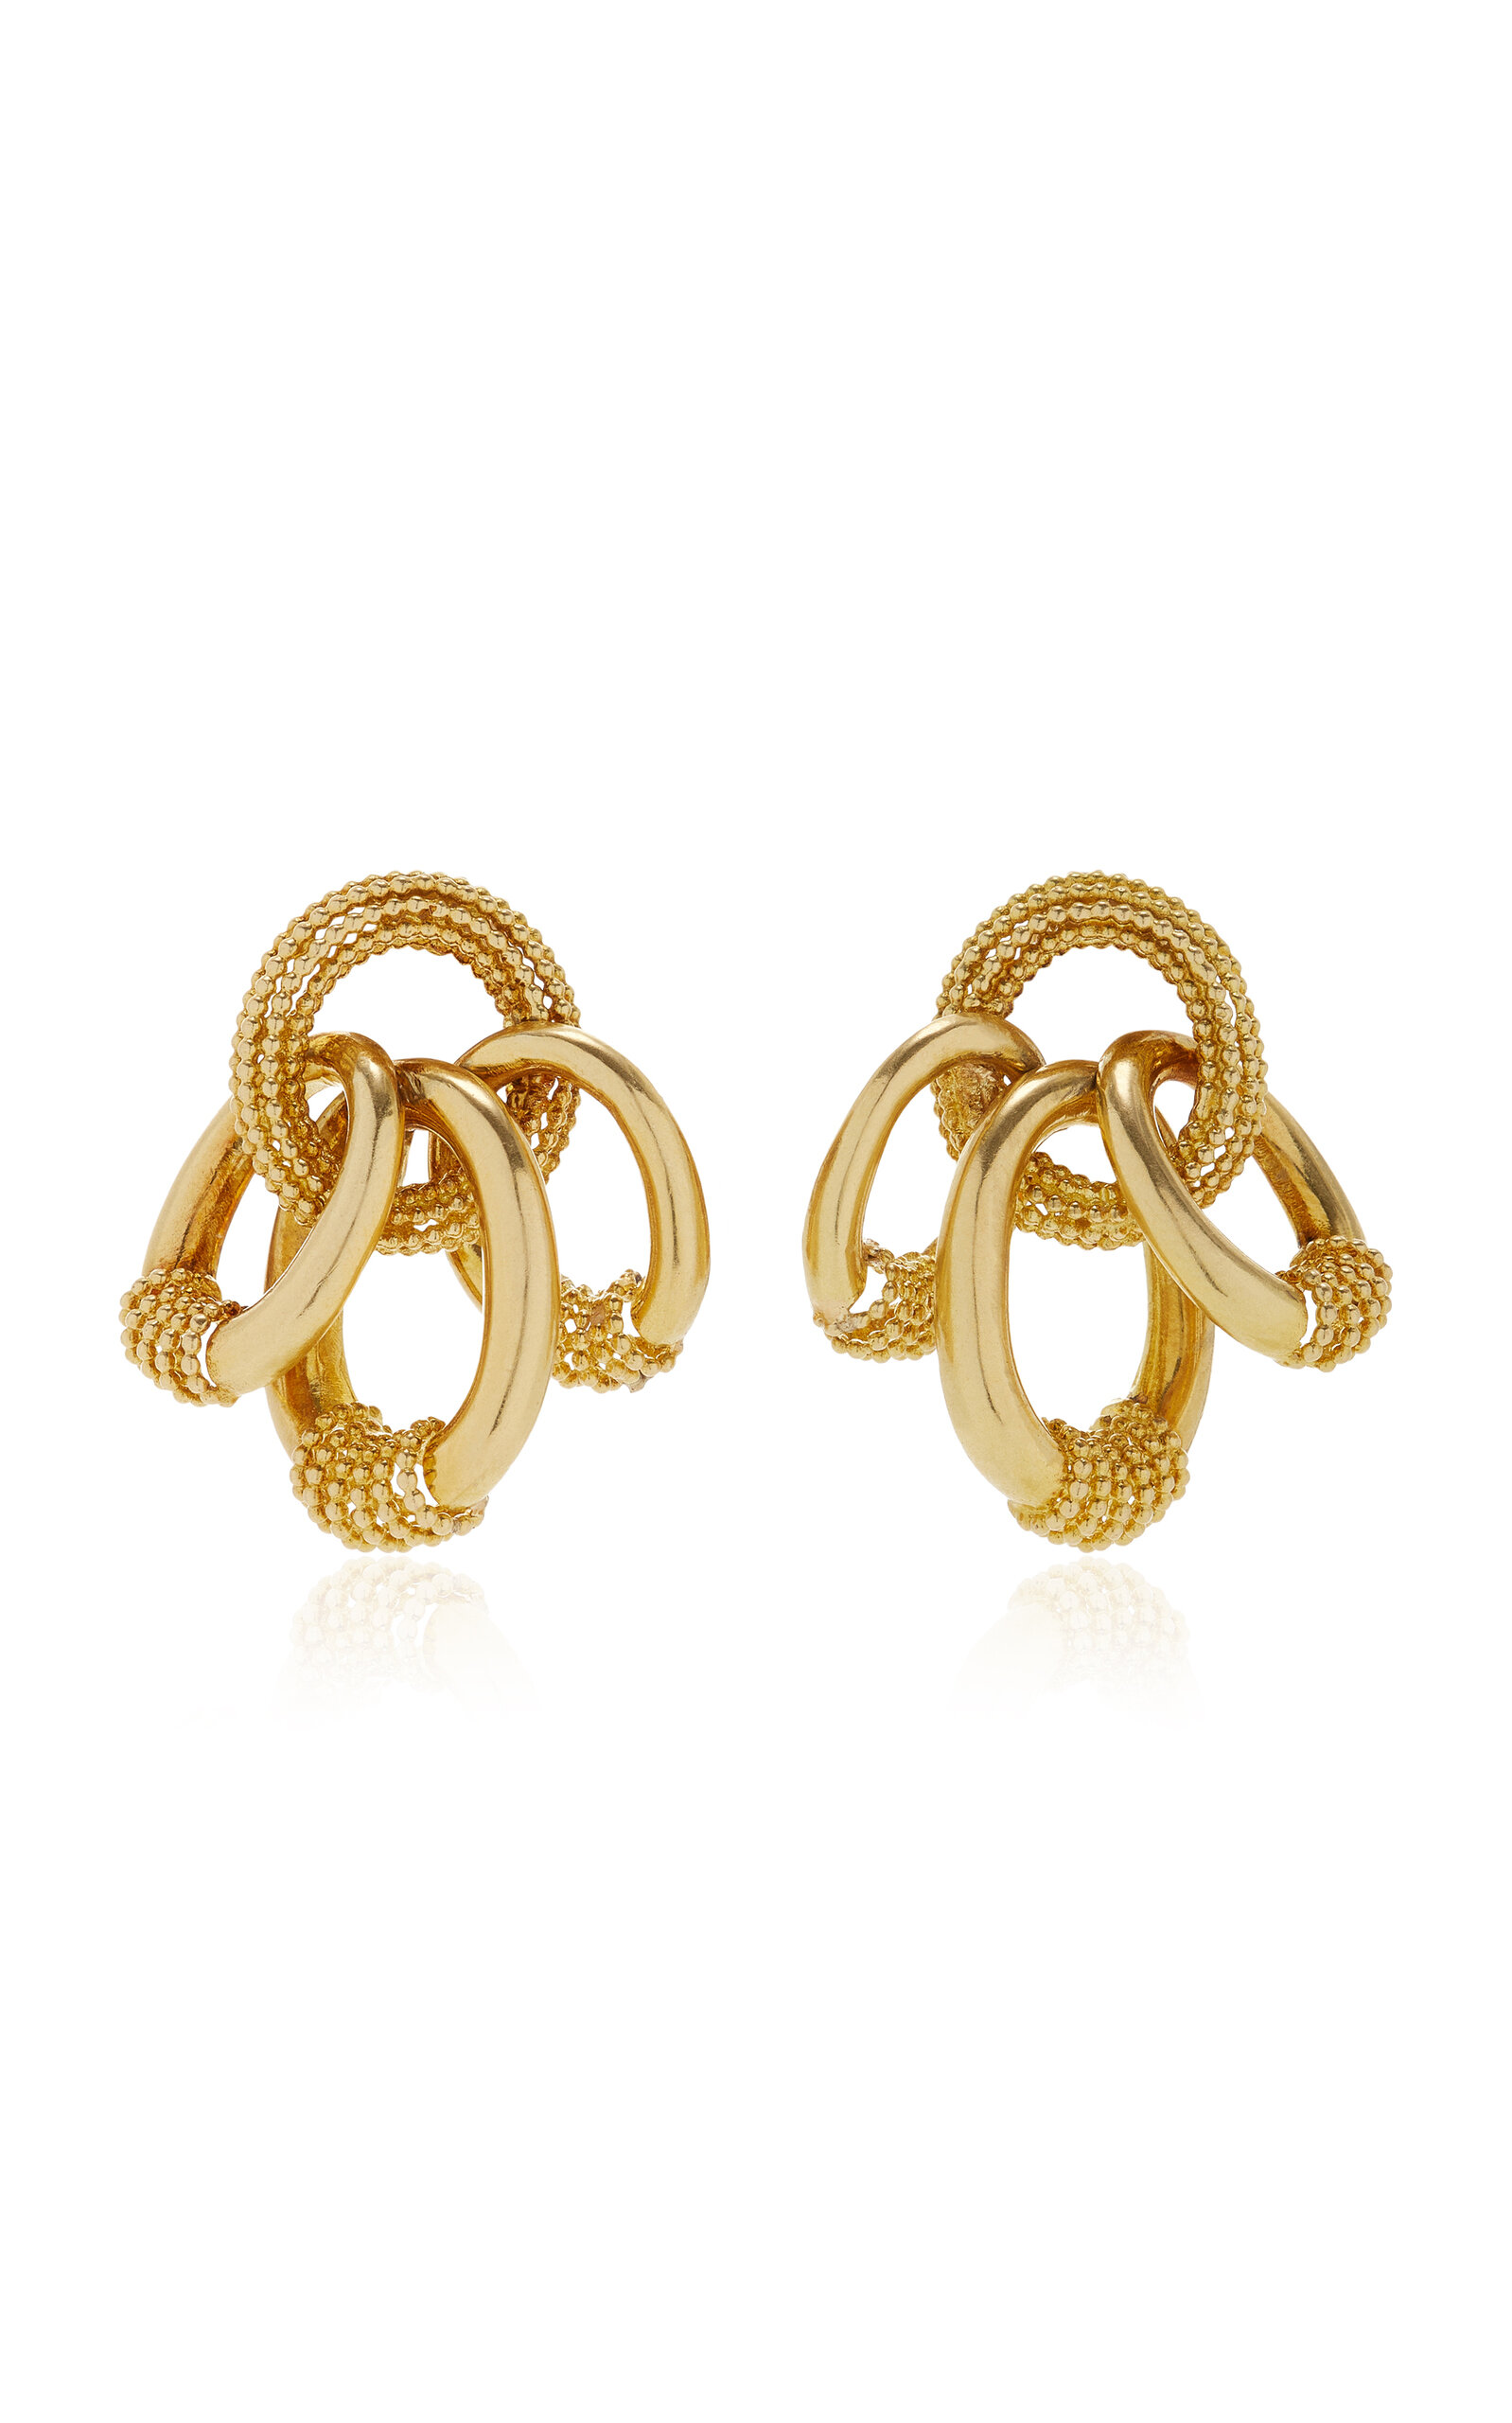 One-of-a-Kind 18K Yellow Gold Cartier Hoop Earrings